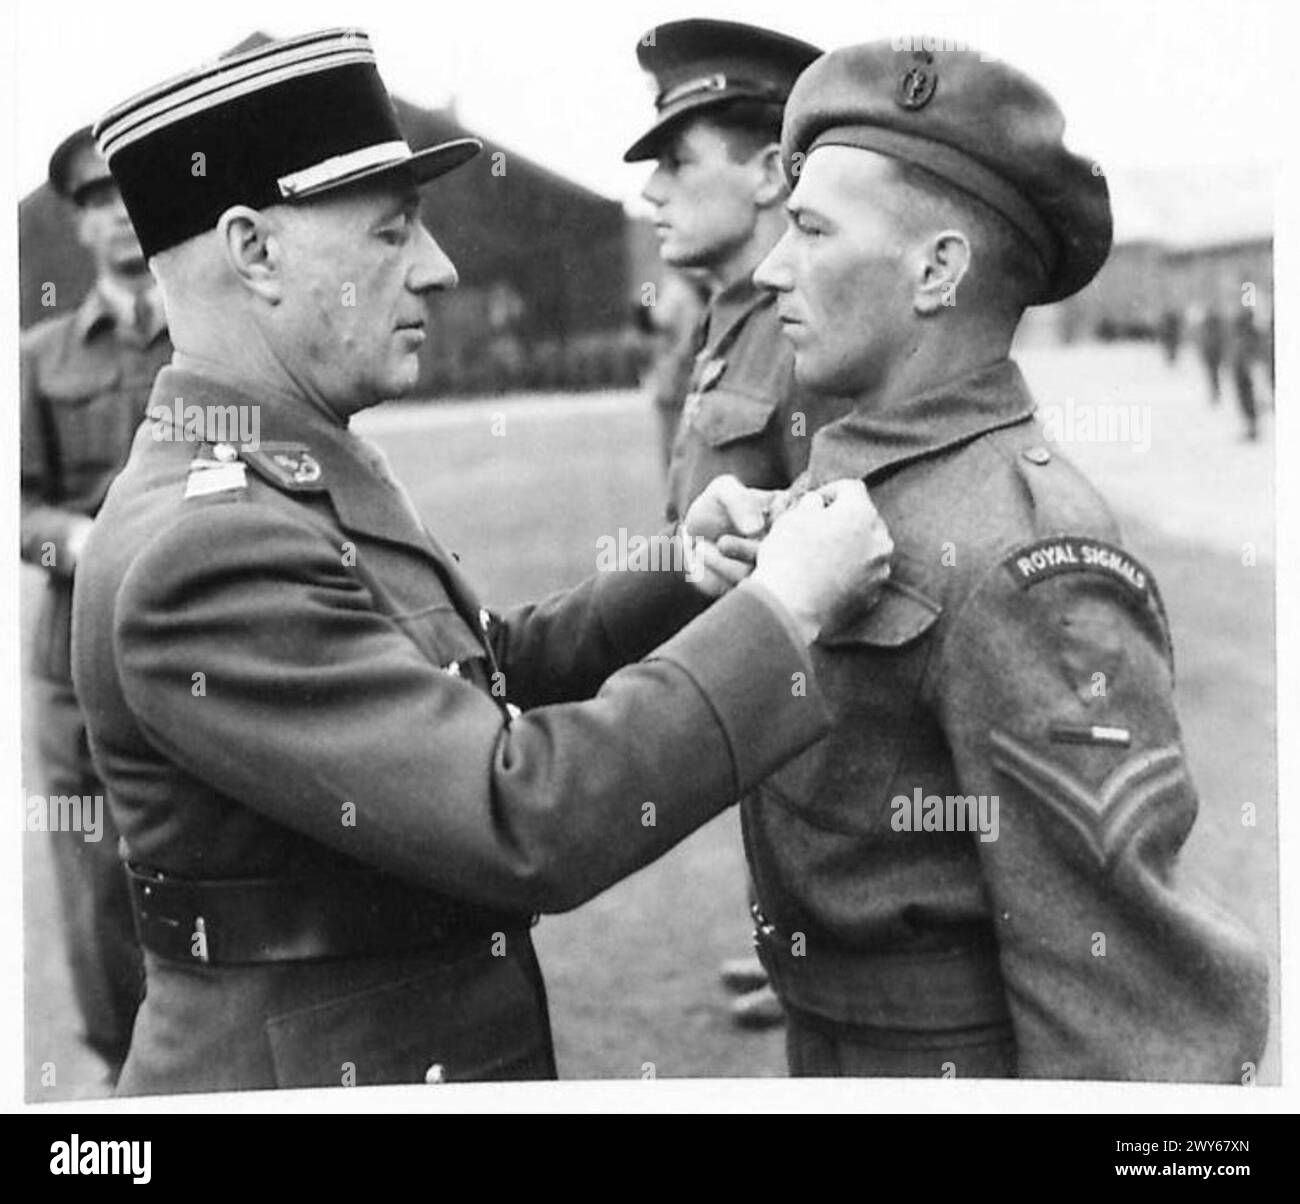 PRESENTATION OF CROIX PE GUERRE [613 REGT. R.A. , 37 R.H.U.] - Corporal A.A. Price 2317711 of 158 AAOR Sigs. receives the Croix de Guerre from Colonel HI Troullier. , British Army, 21st Army Group Stock Photo